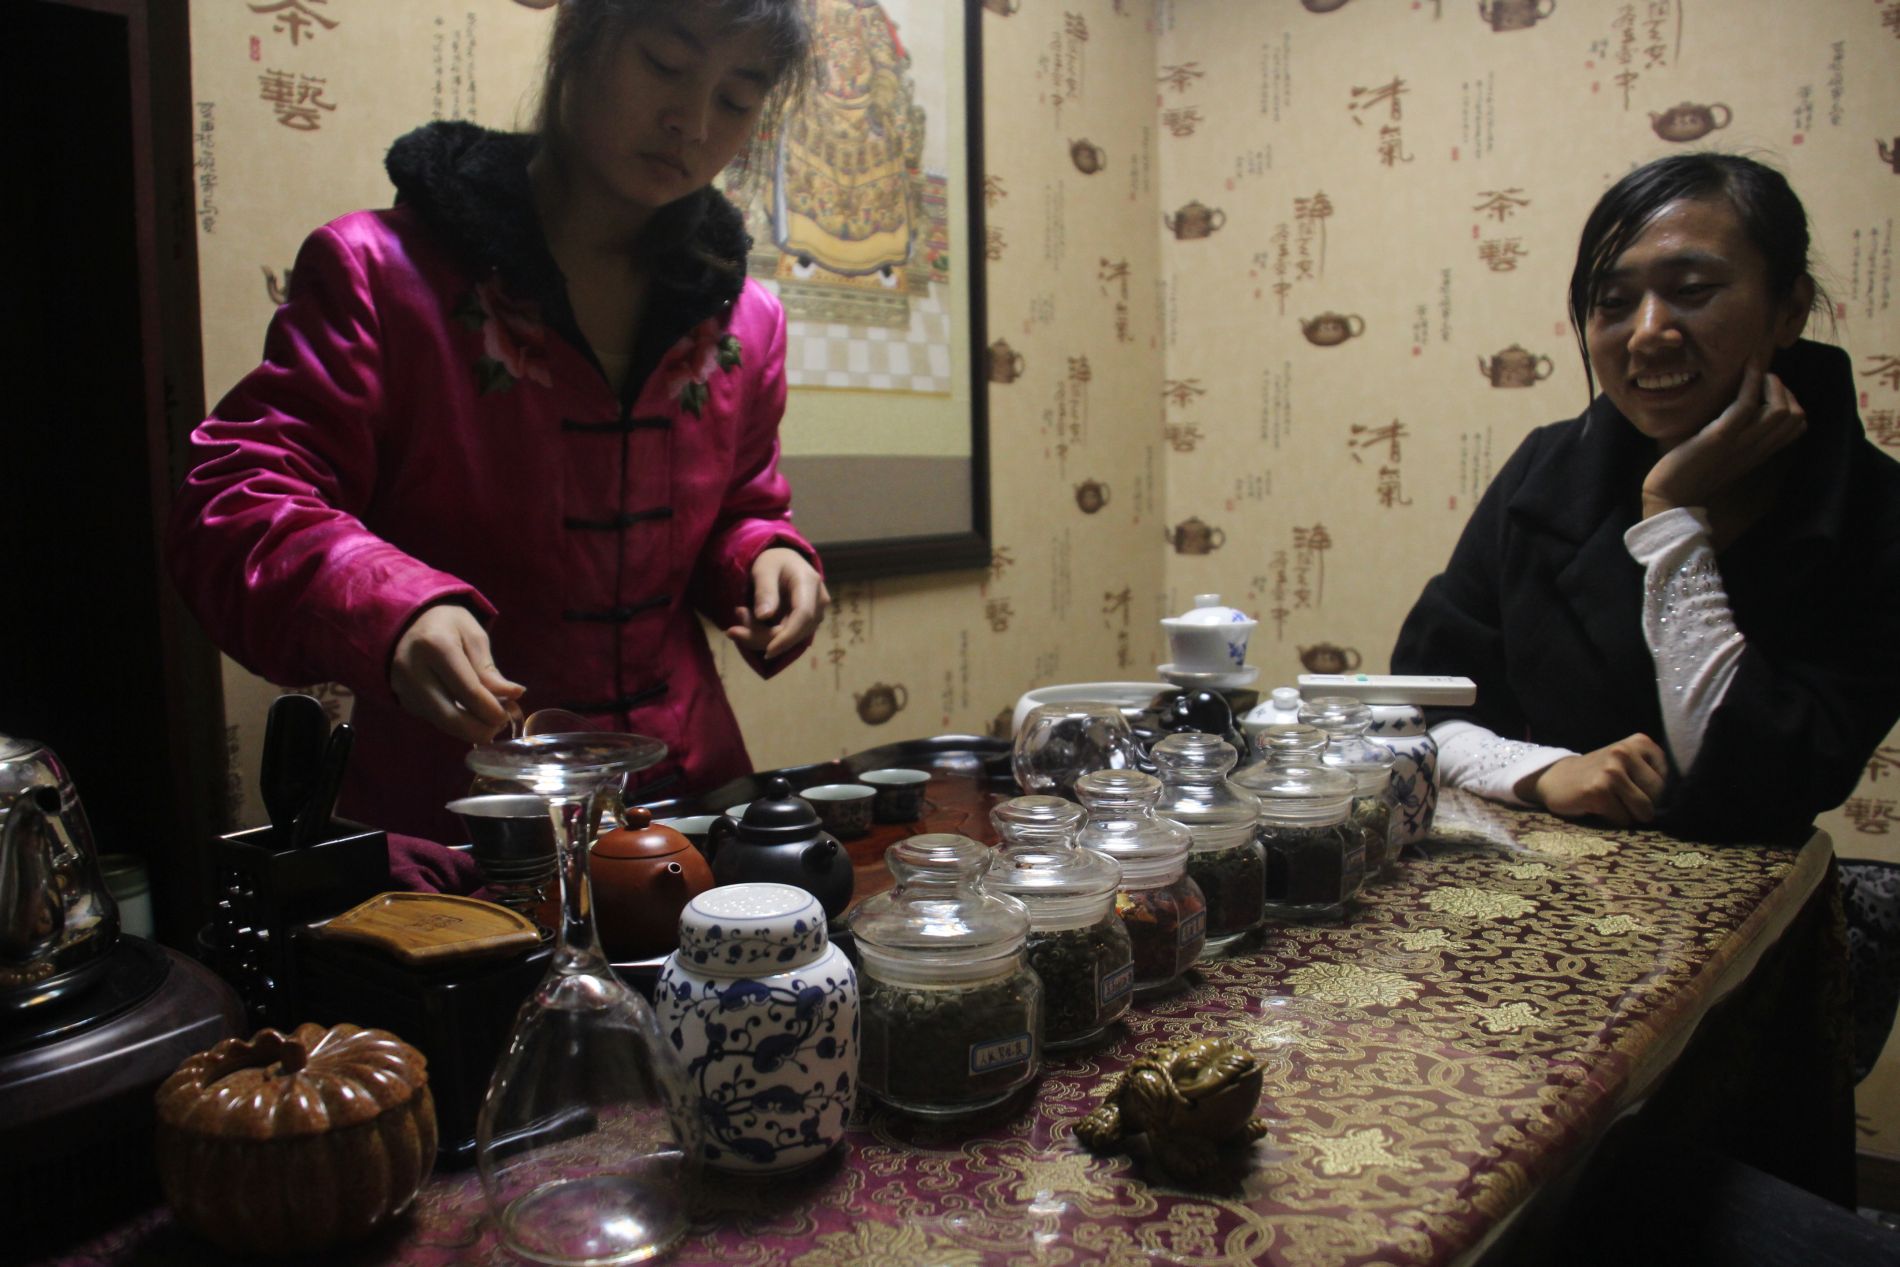 A woman pours tea during Shanghai's well-known tea ceremony con.